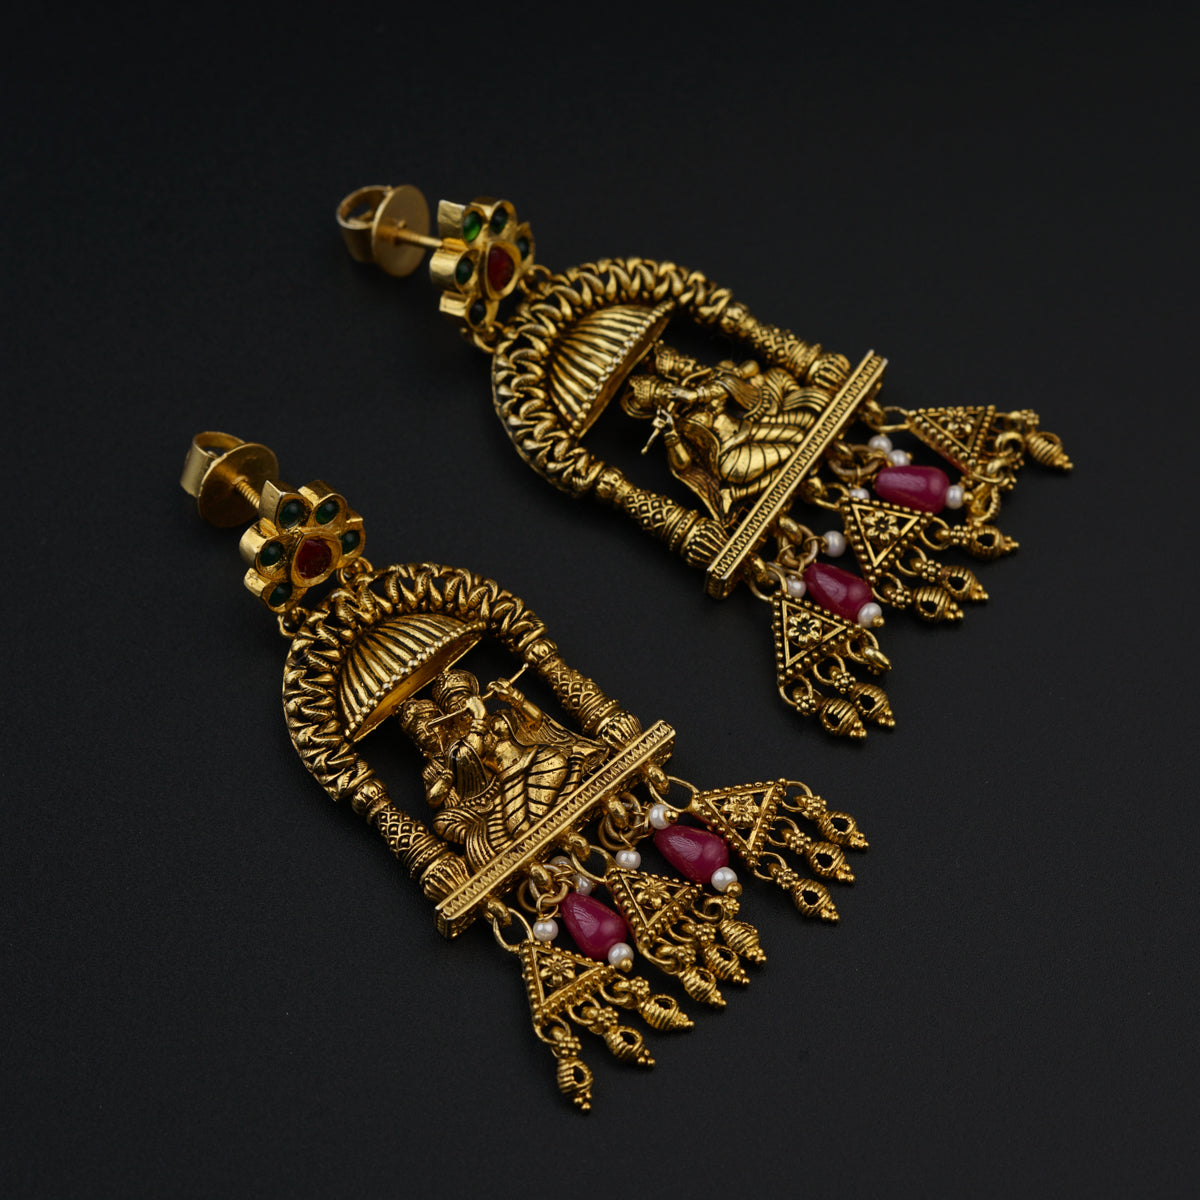 a pair of gold earrings with garnets and pearls